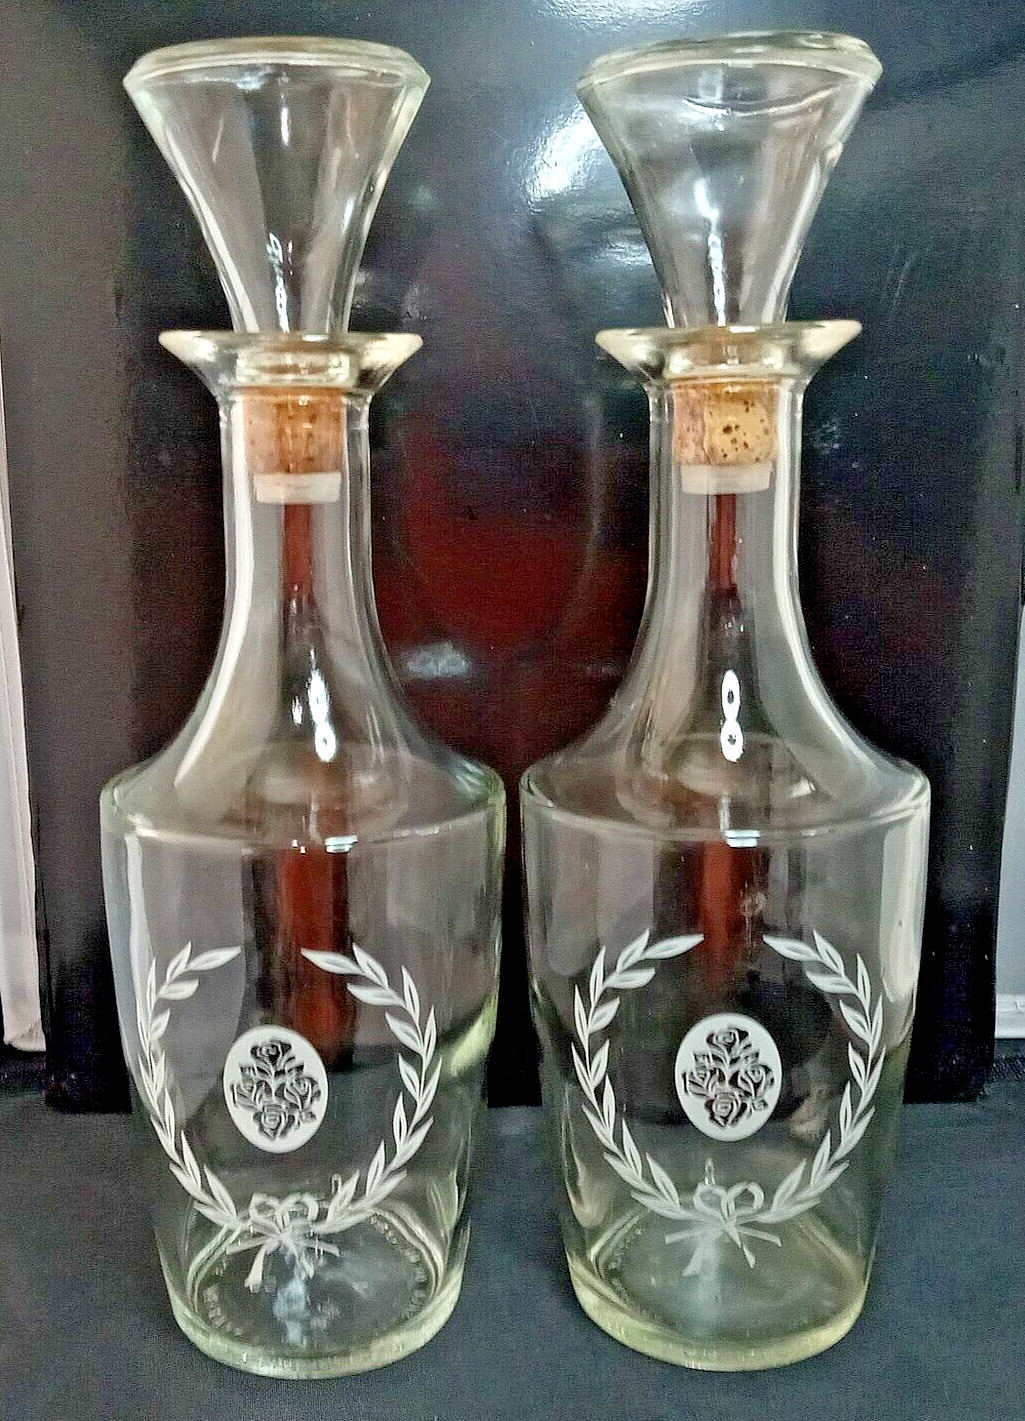 2 Vintage Pair Decanter Clear Glass Bottles W/ Stoppers Wreath Design 60s MCM